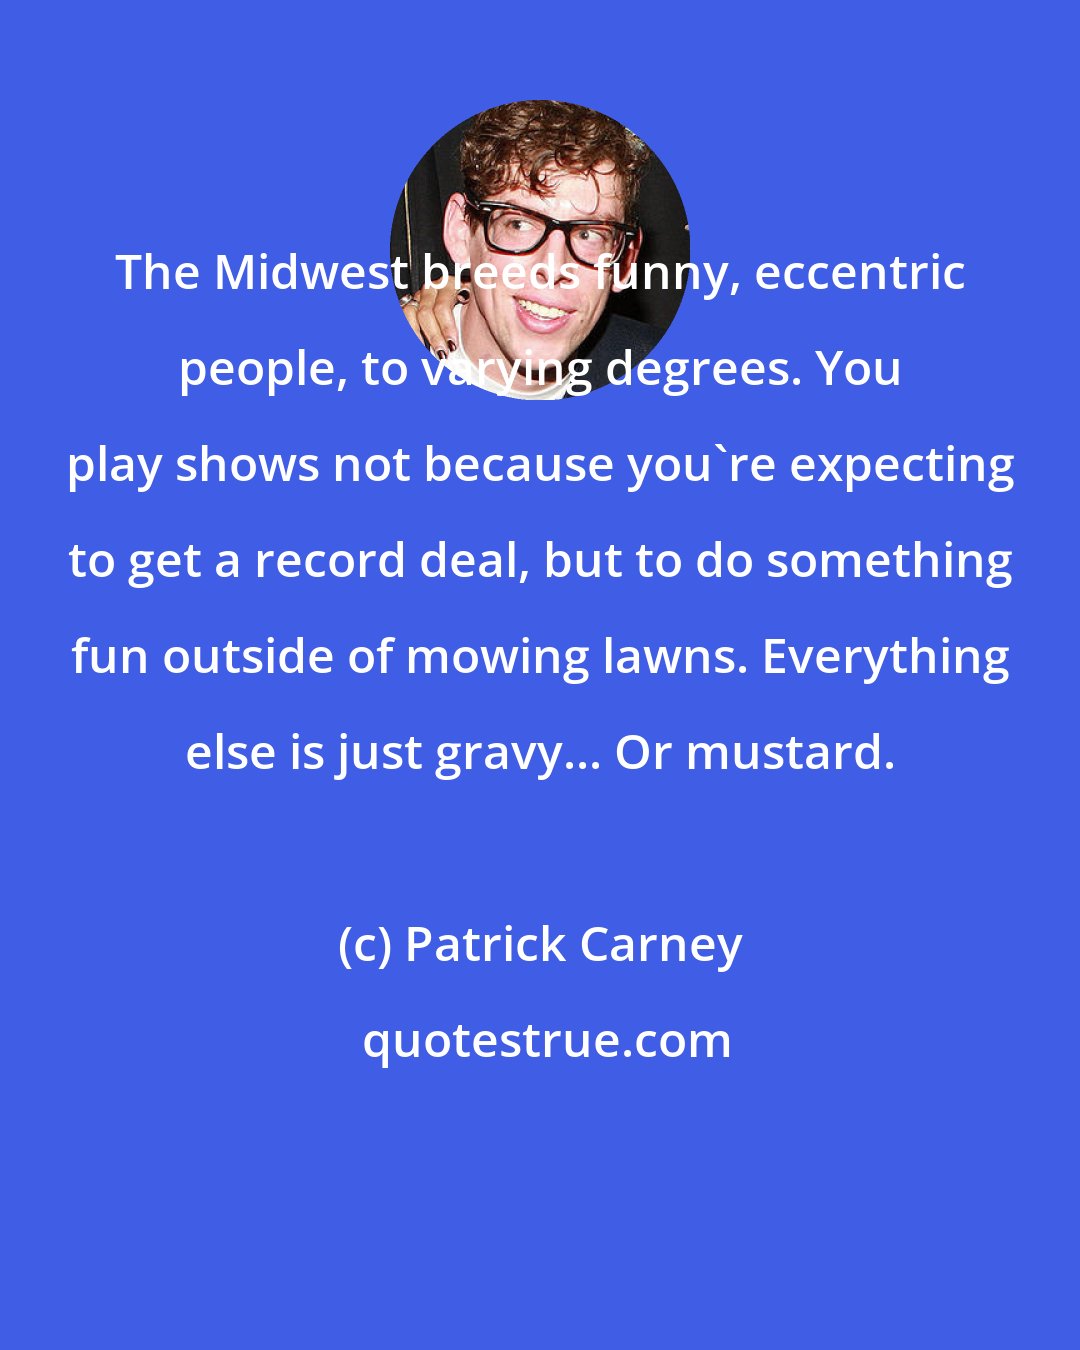 Patrick Carney: The Midwest breeds funny, eccentric people, to varying degrees. You play shows not because you're expecting to get a record deal, but to do something fun outside of mowing lawns. Everything else is just gravy... Or mustard.